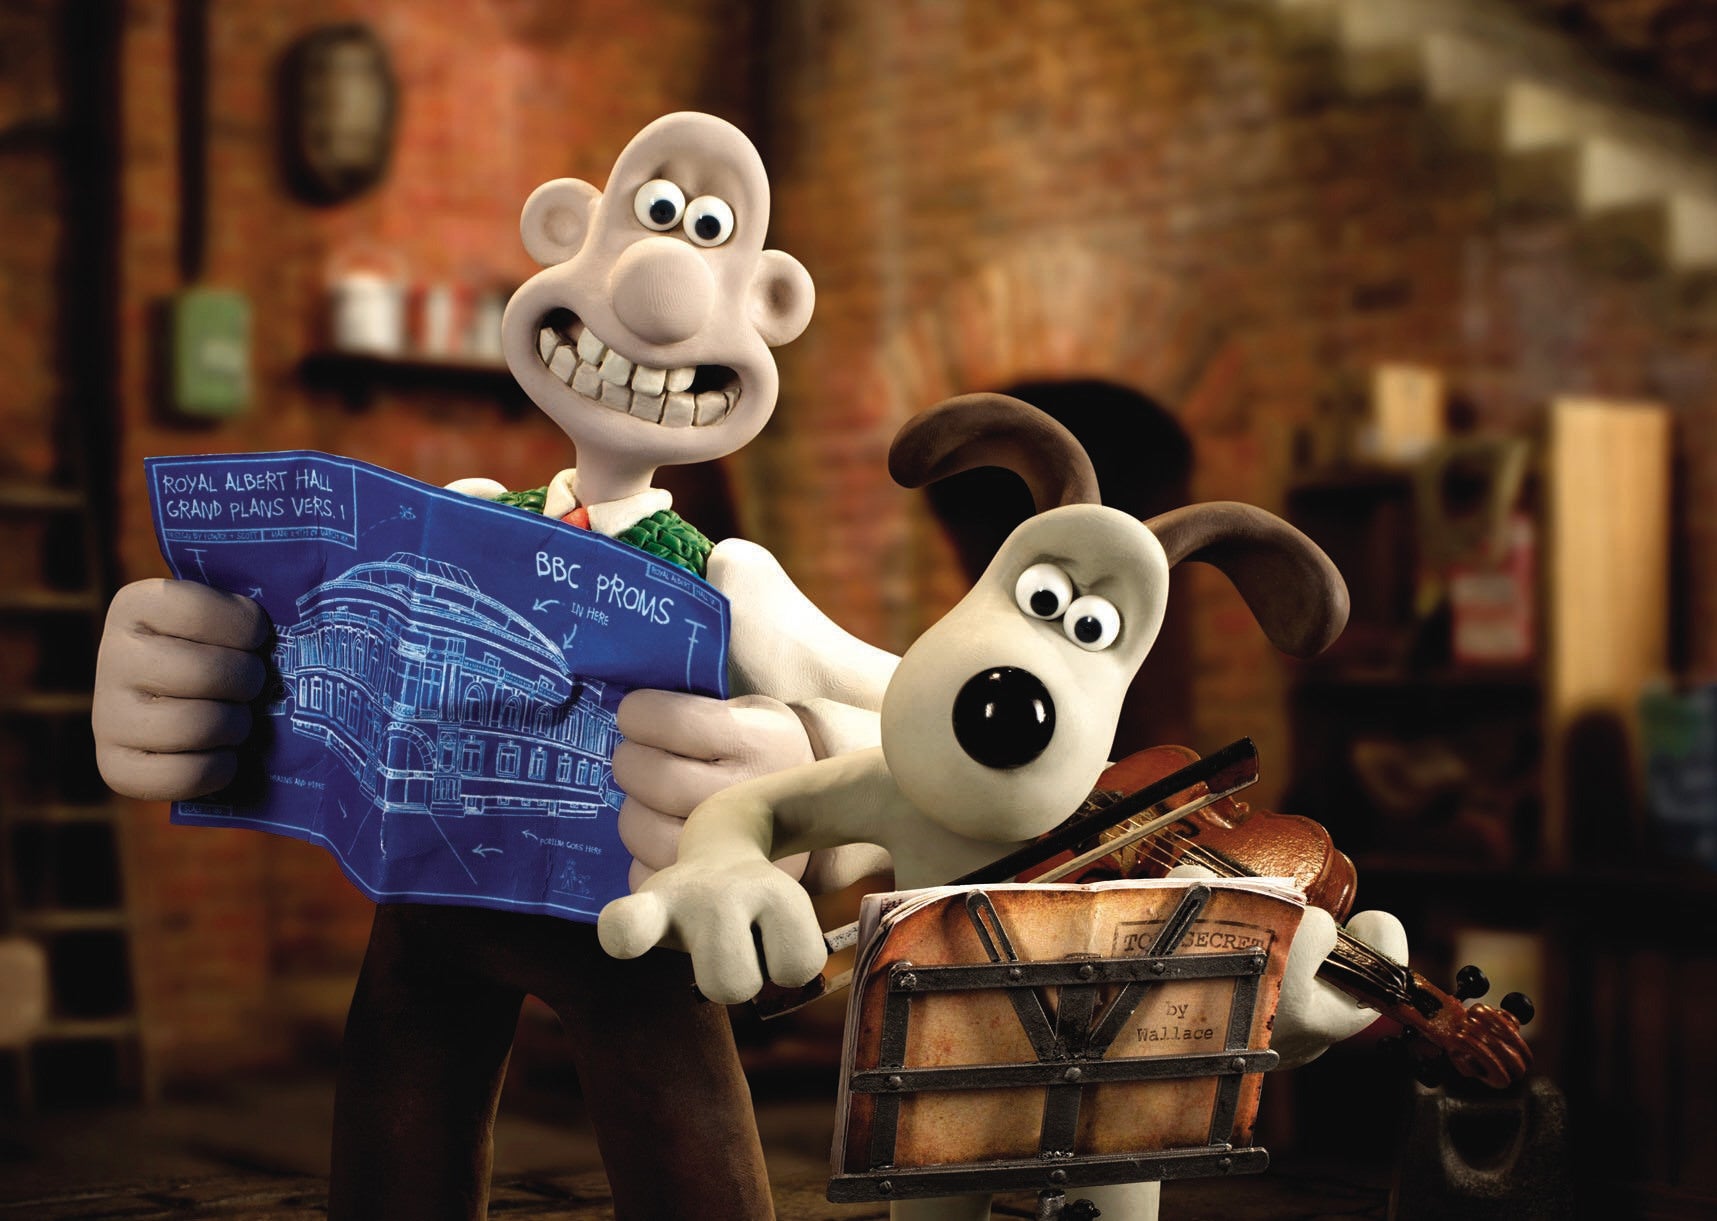 wallace and gromit, production company, wallace and gromit animators respond after ‘clay shortage’ sparks fears over fate of characters